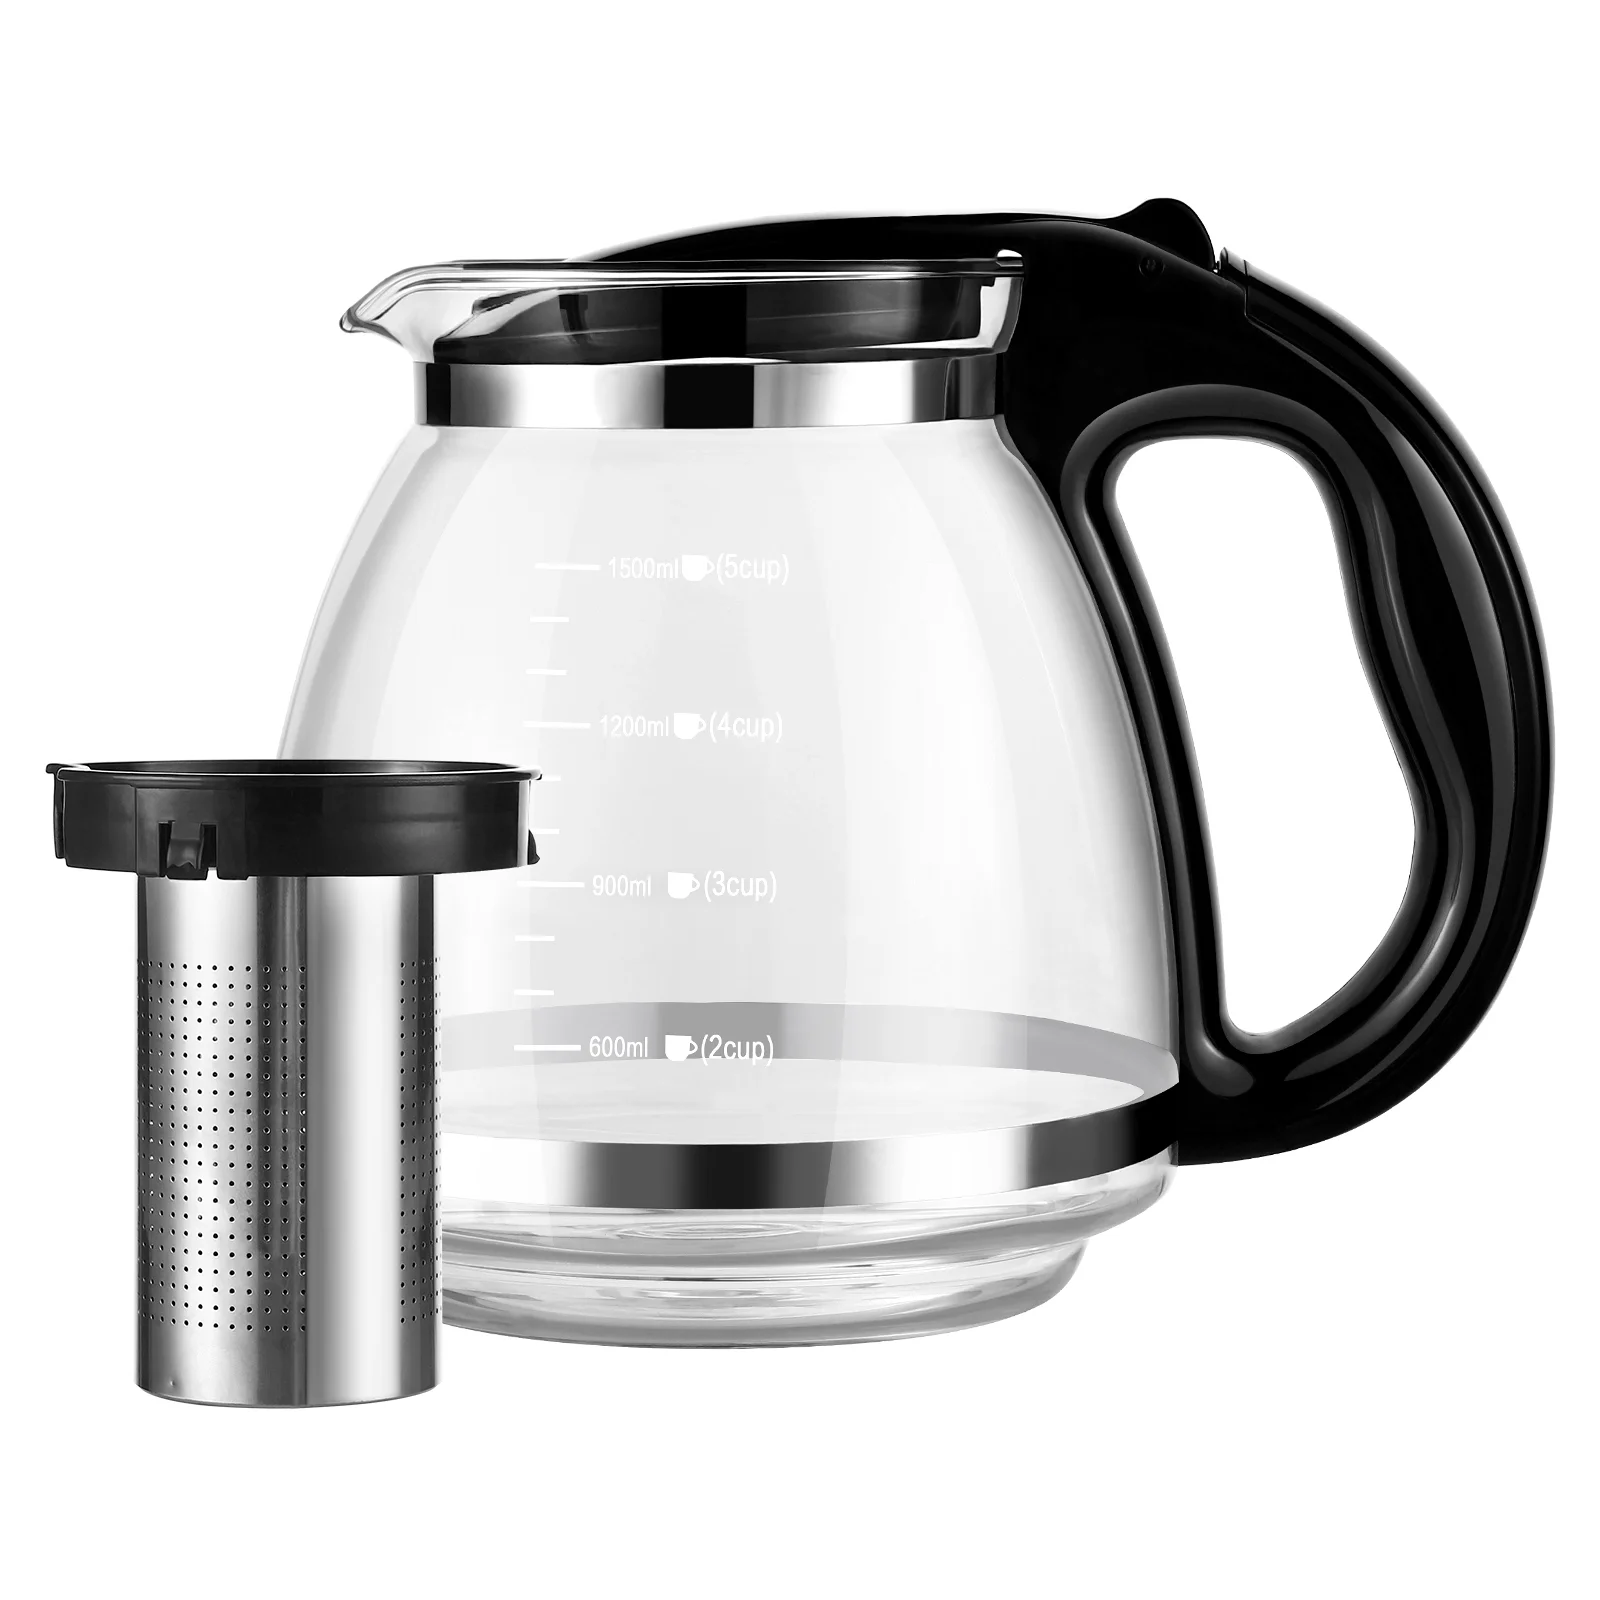 

Tea Kettle Set Stovetop Safe Pot Maker Infuser Glass Teapot Removable Kungfu Teaware Coffee and tableware